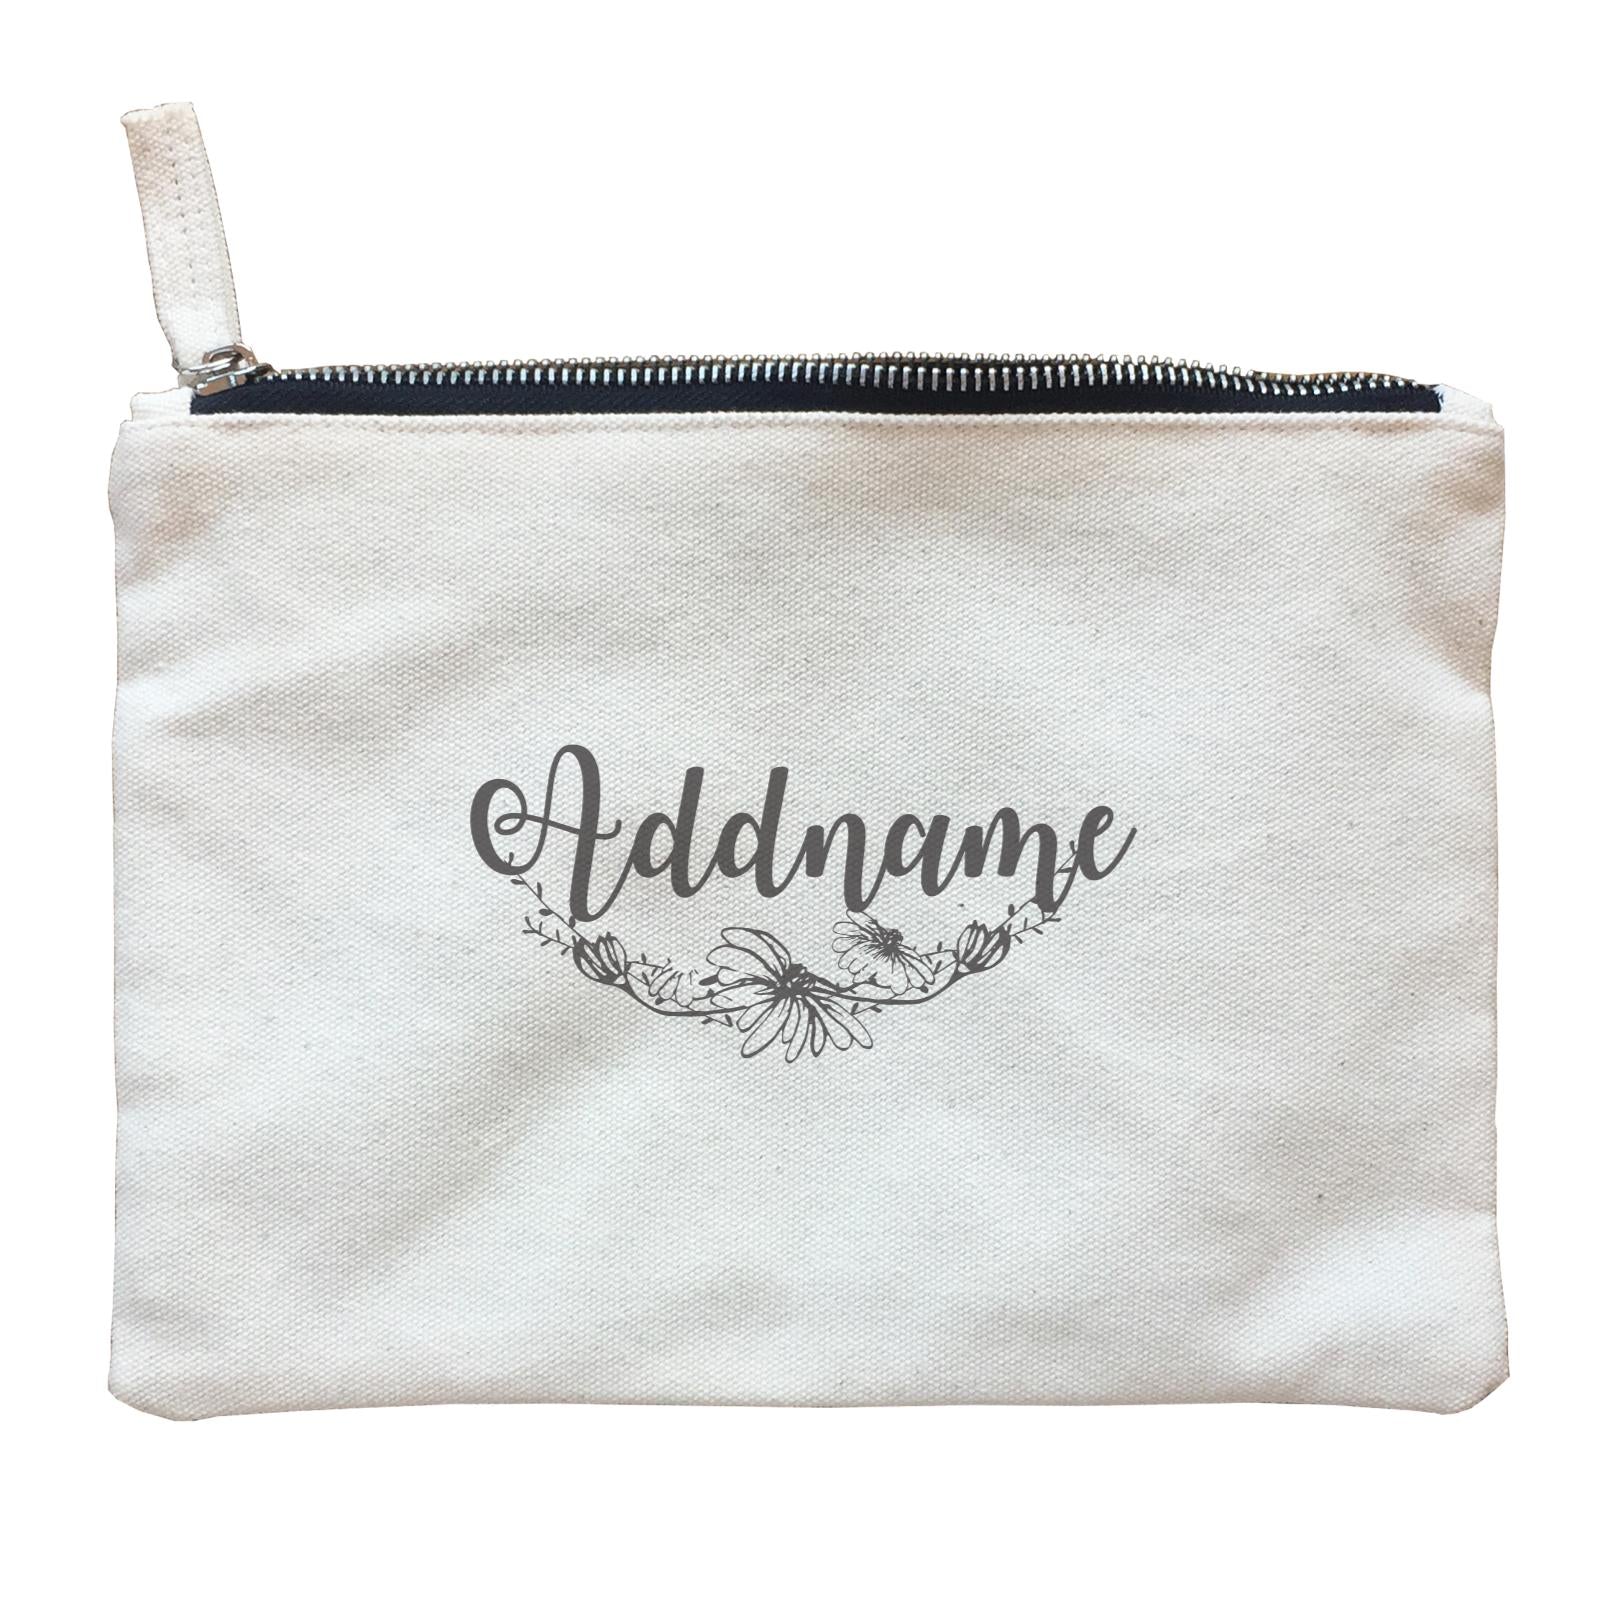 Bridesmaid Monochrome Floral and Leaves Addname Accessories Zipper Pouch